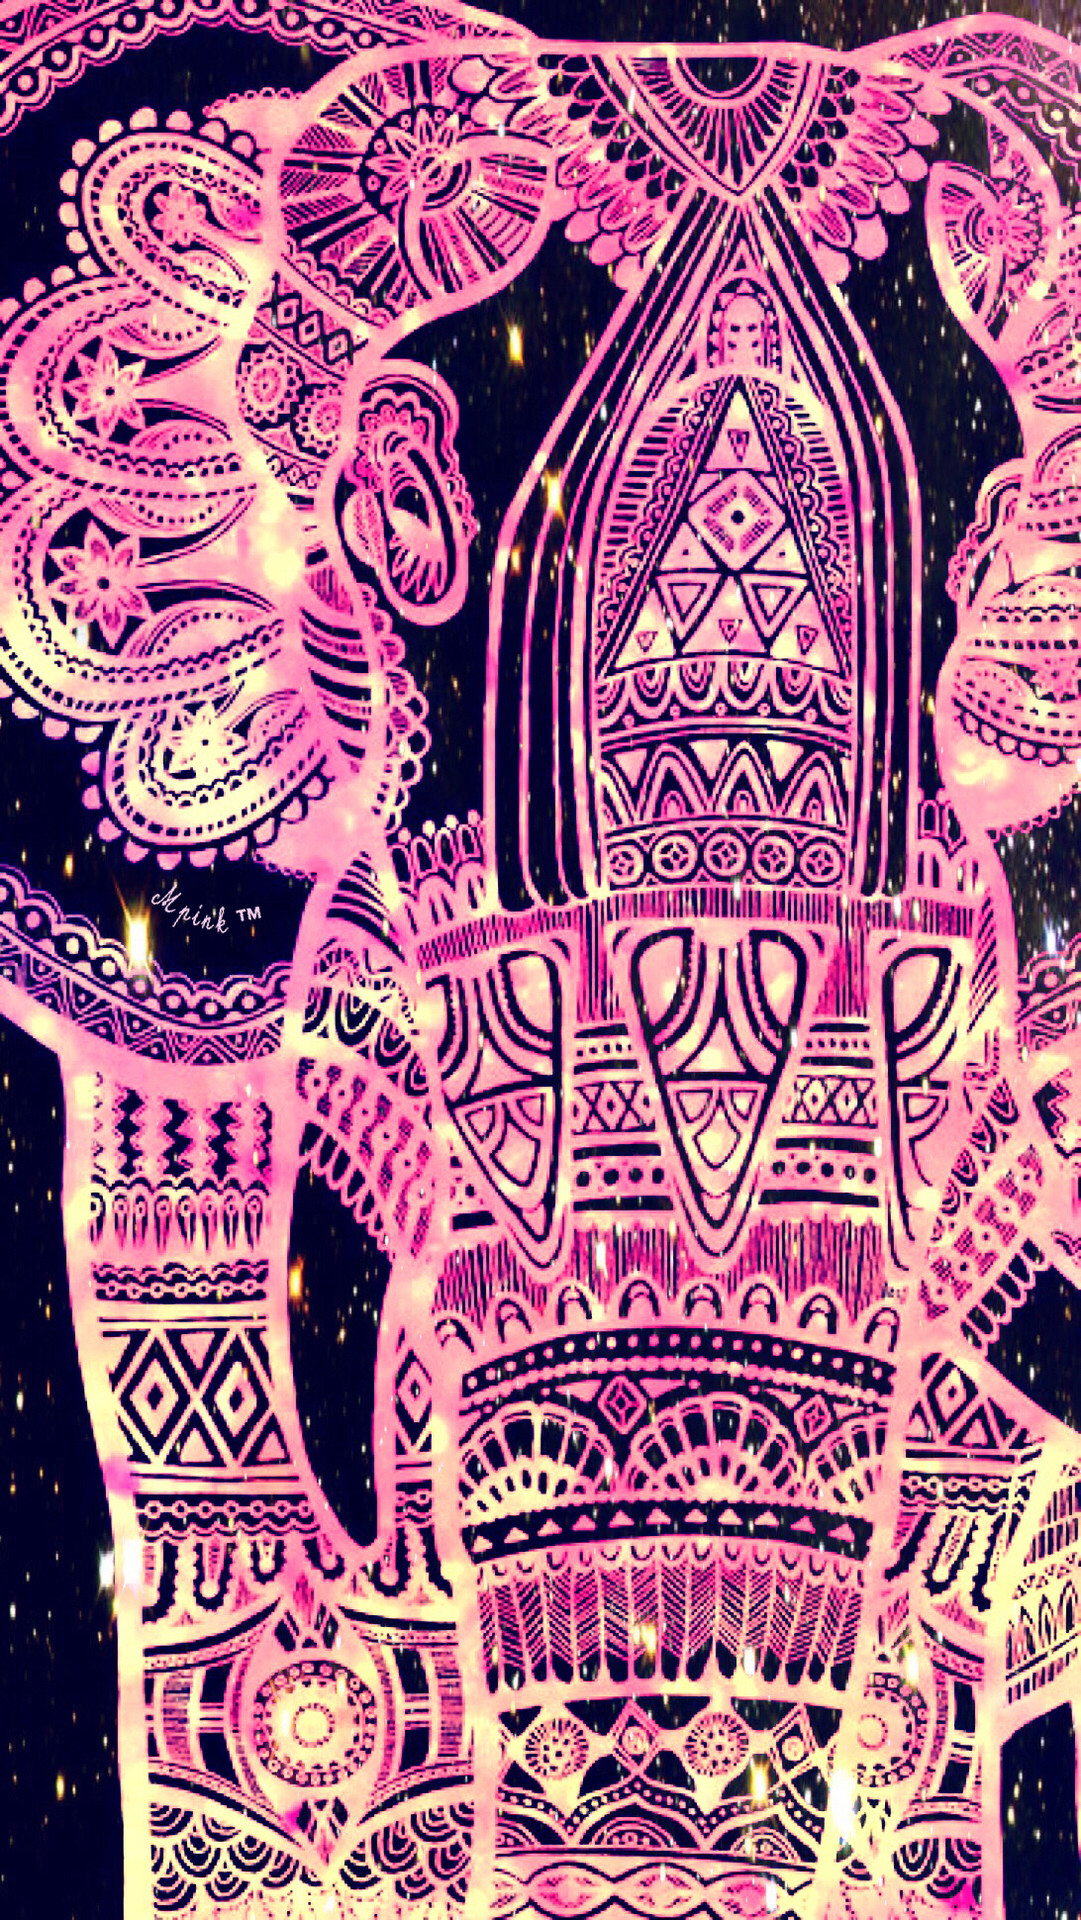 Tribal Pink Elephant Wallpaper / Lockscreen Girly, Cute, Wallpapers for iPhone, Android,